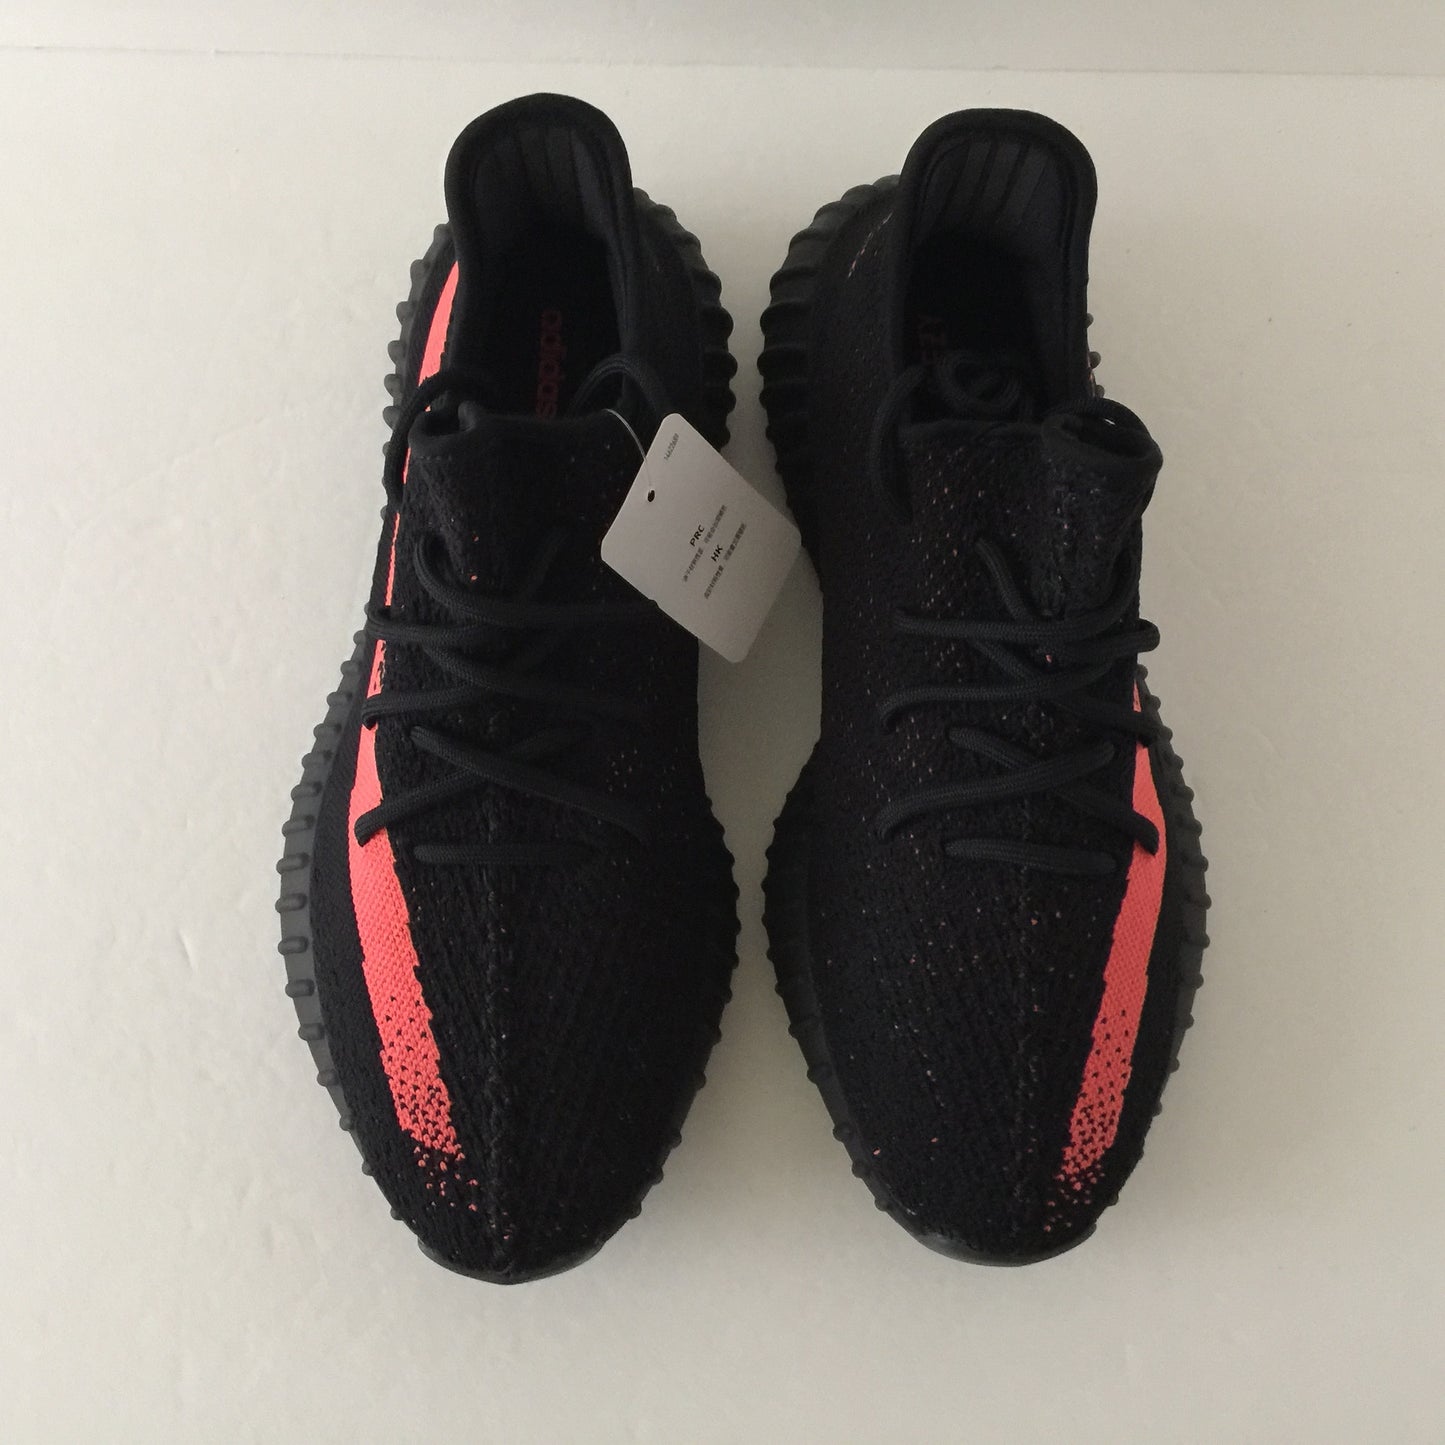 DS Adidas Yeezy Boost 350 V2 Solar Red Size 9.5 - DOPEFOOT
 - 3